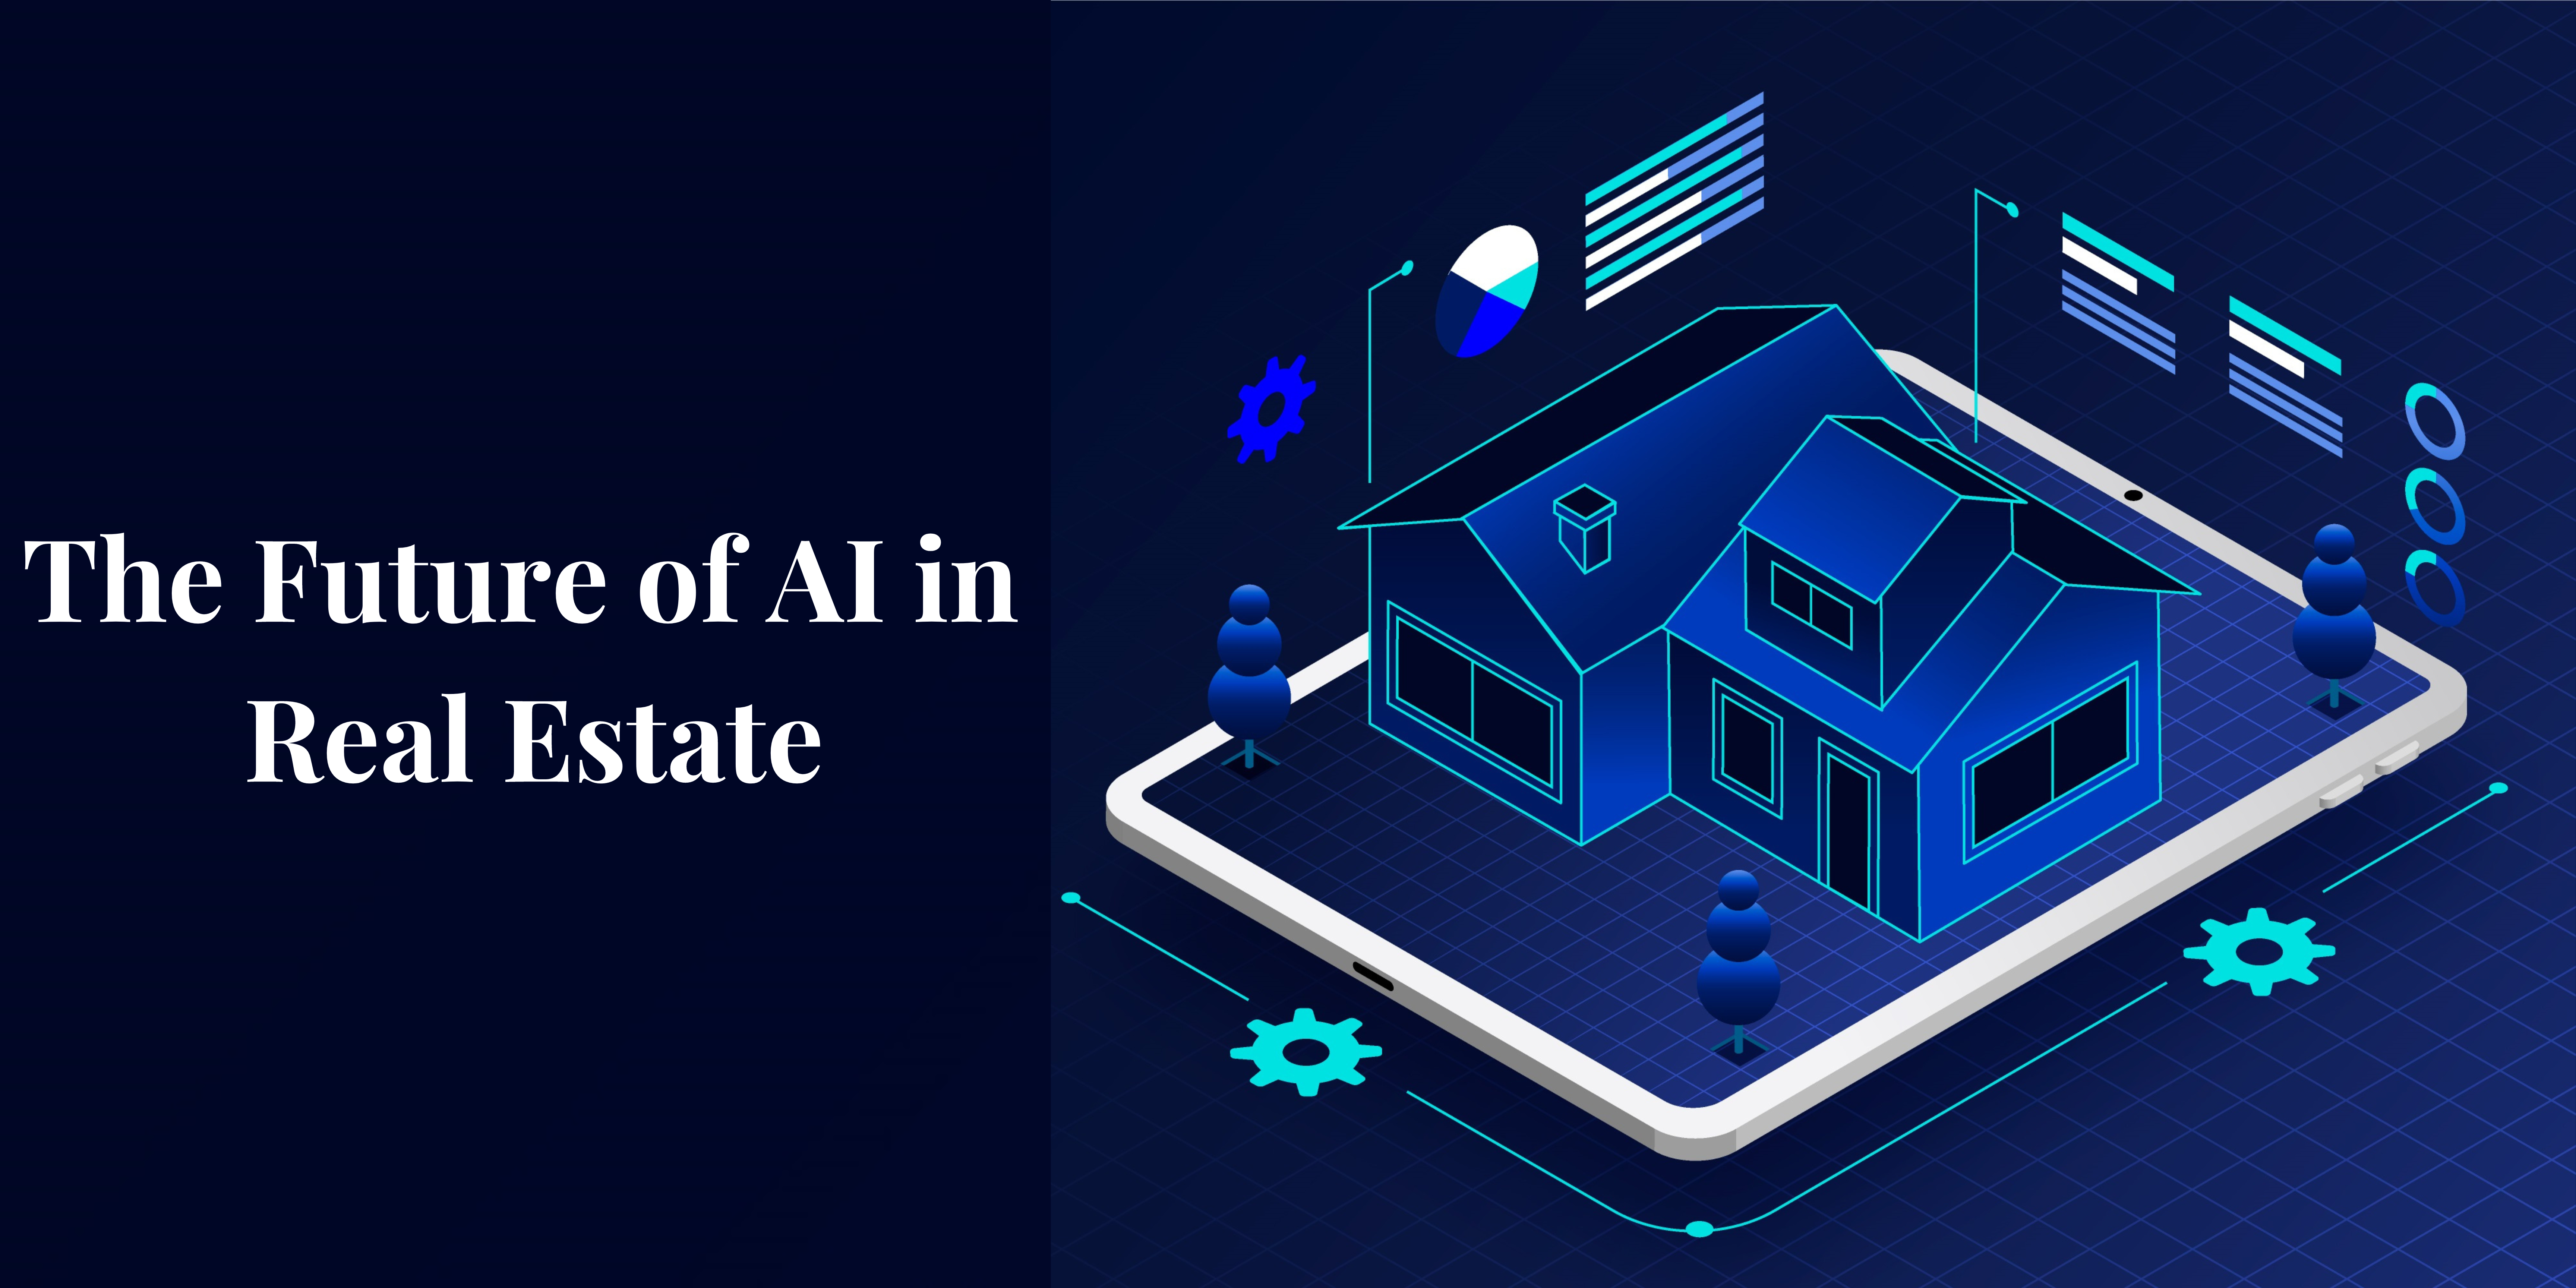 The future of AI in real estate: How technology is transforming property investments